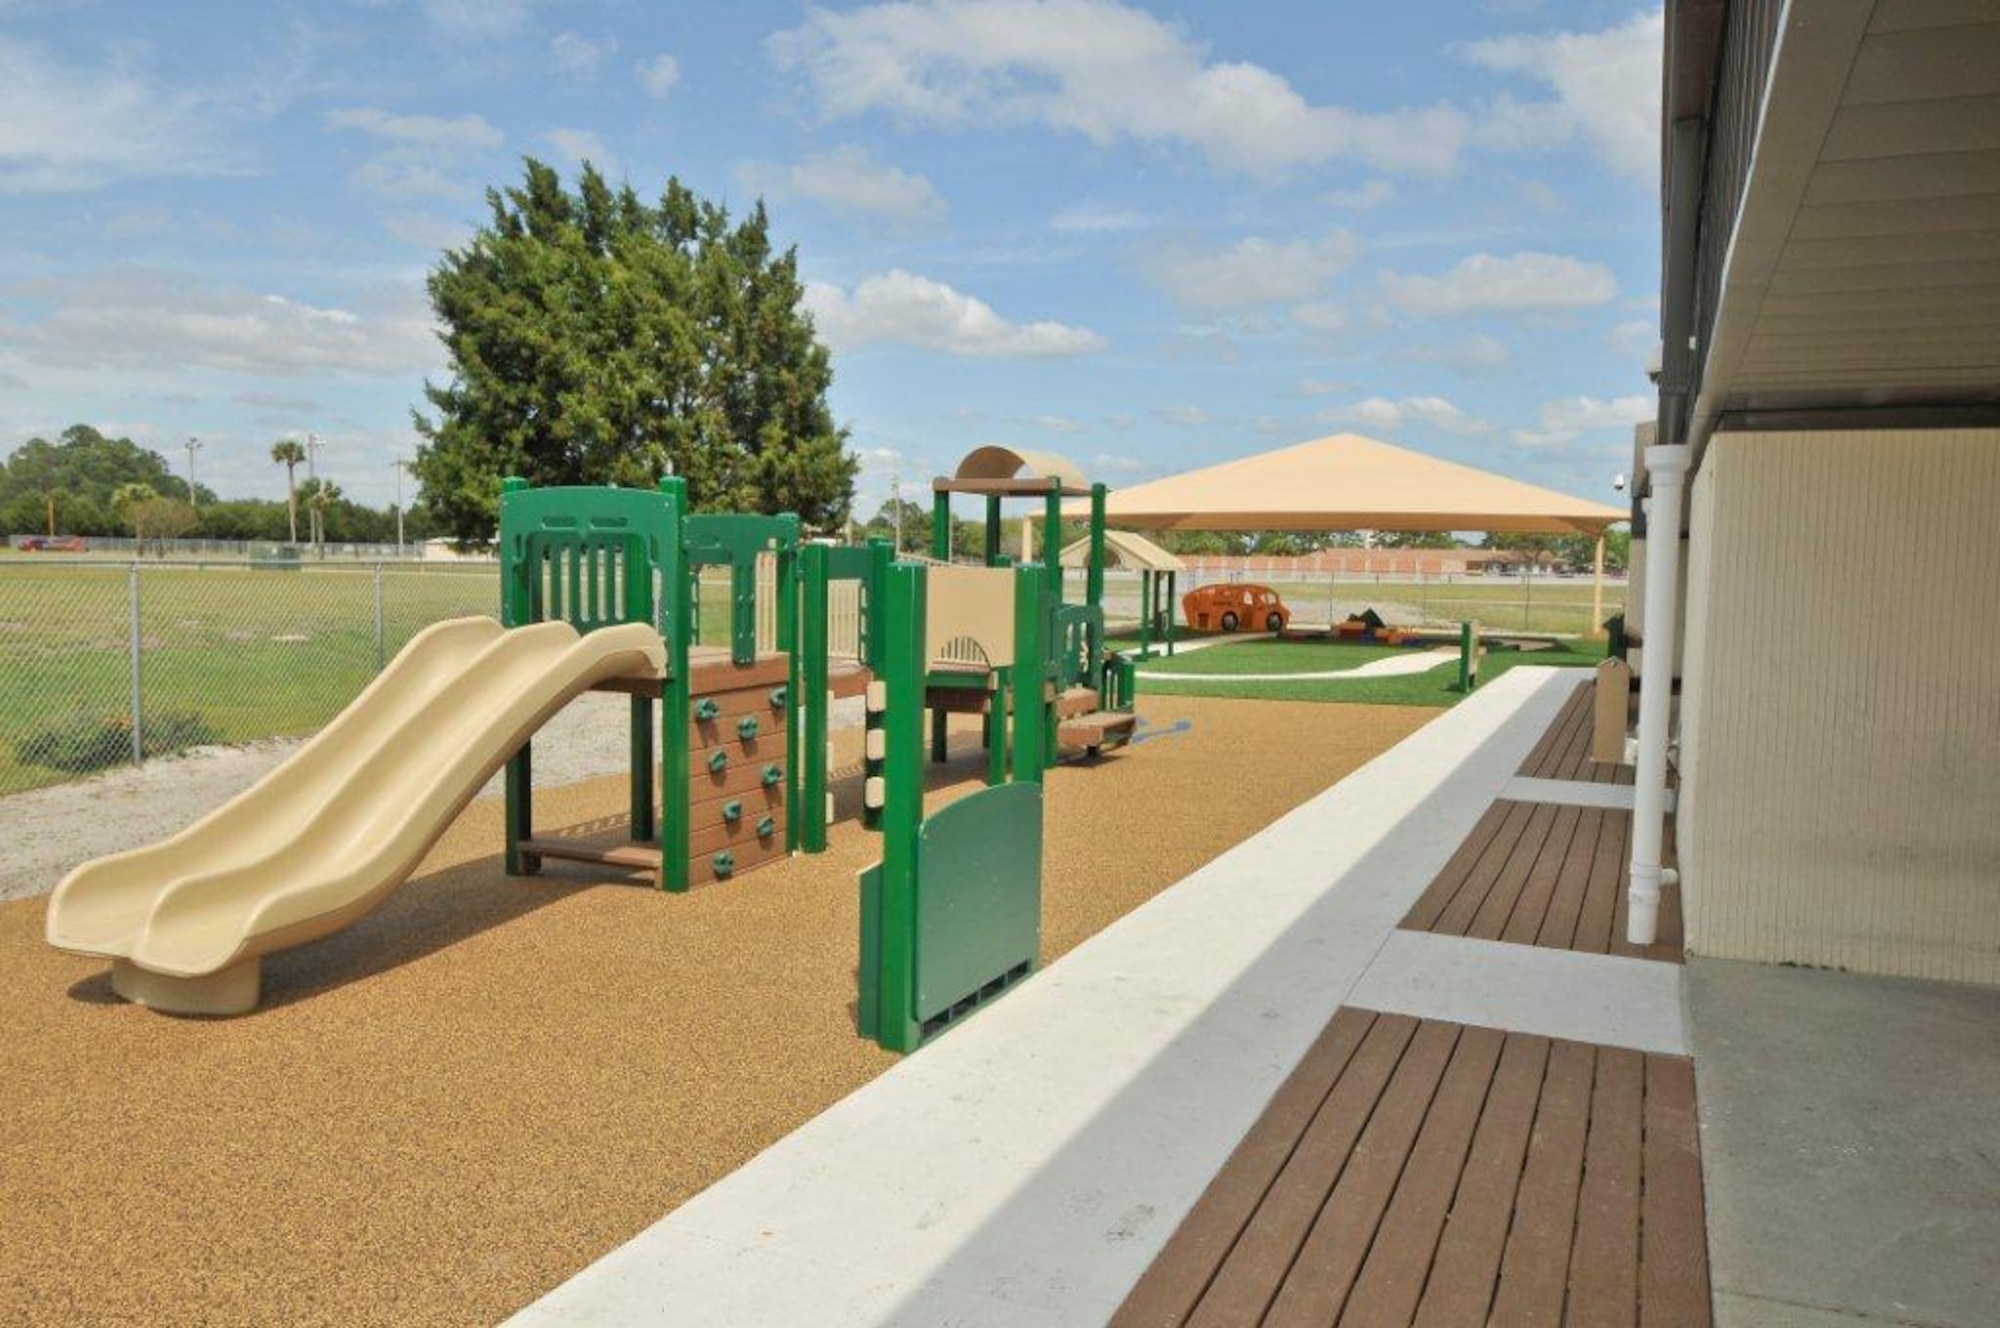 Tyndall invests the Energy Incentive Award money into a Child Development Center playground renovation project that provides play areas specifically designed for children ranging from infants to 5 years old. (U.S. Air Force photo by Chris Cokeing)